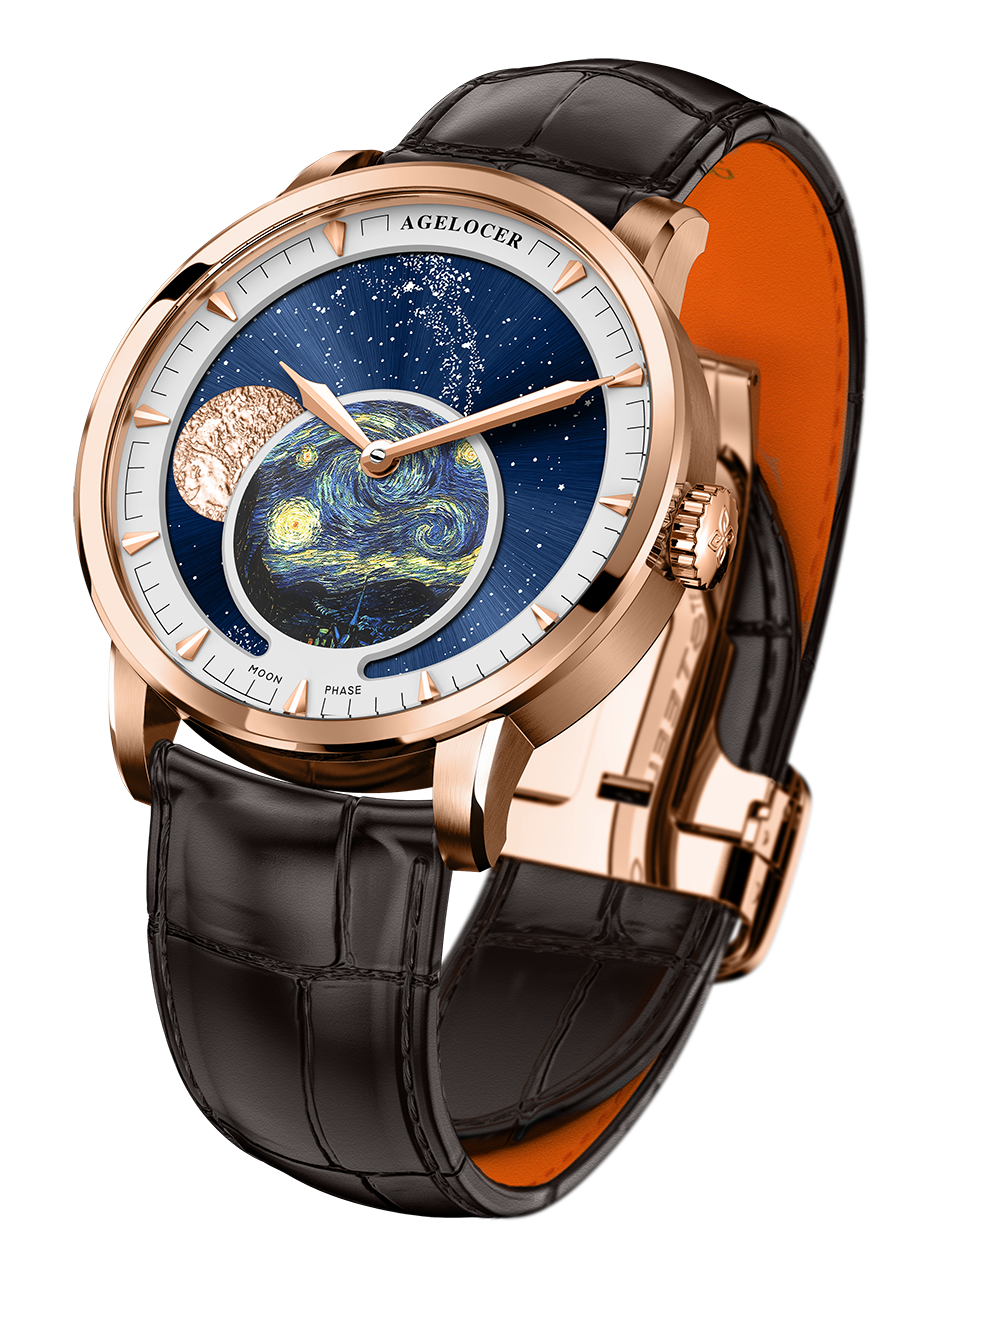 Automatic Moon Phase Watch Van Gogh Oil Painting Dial 6401